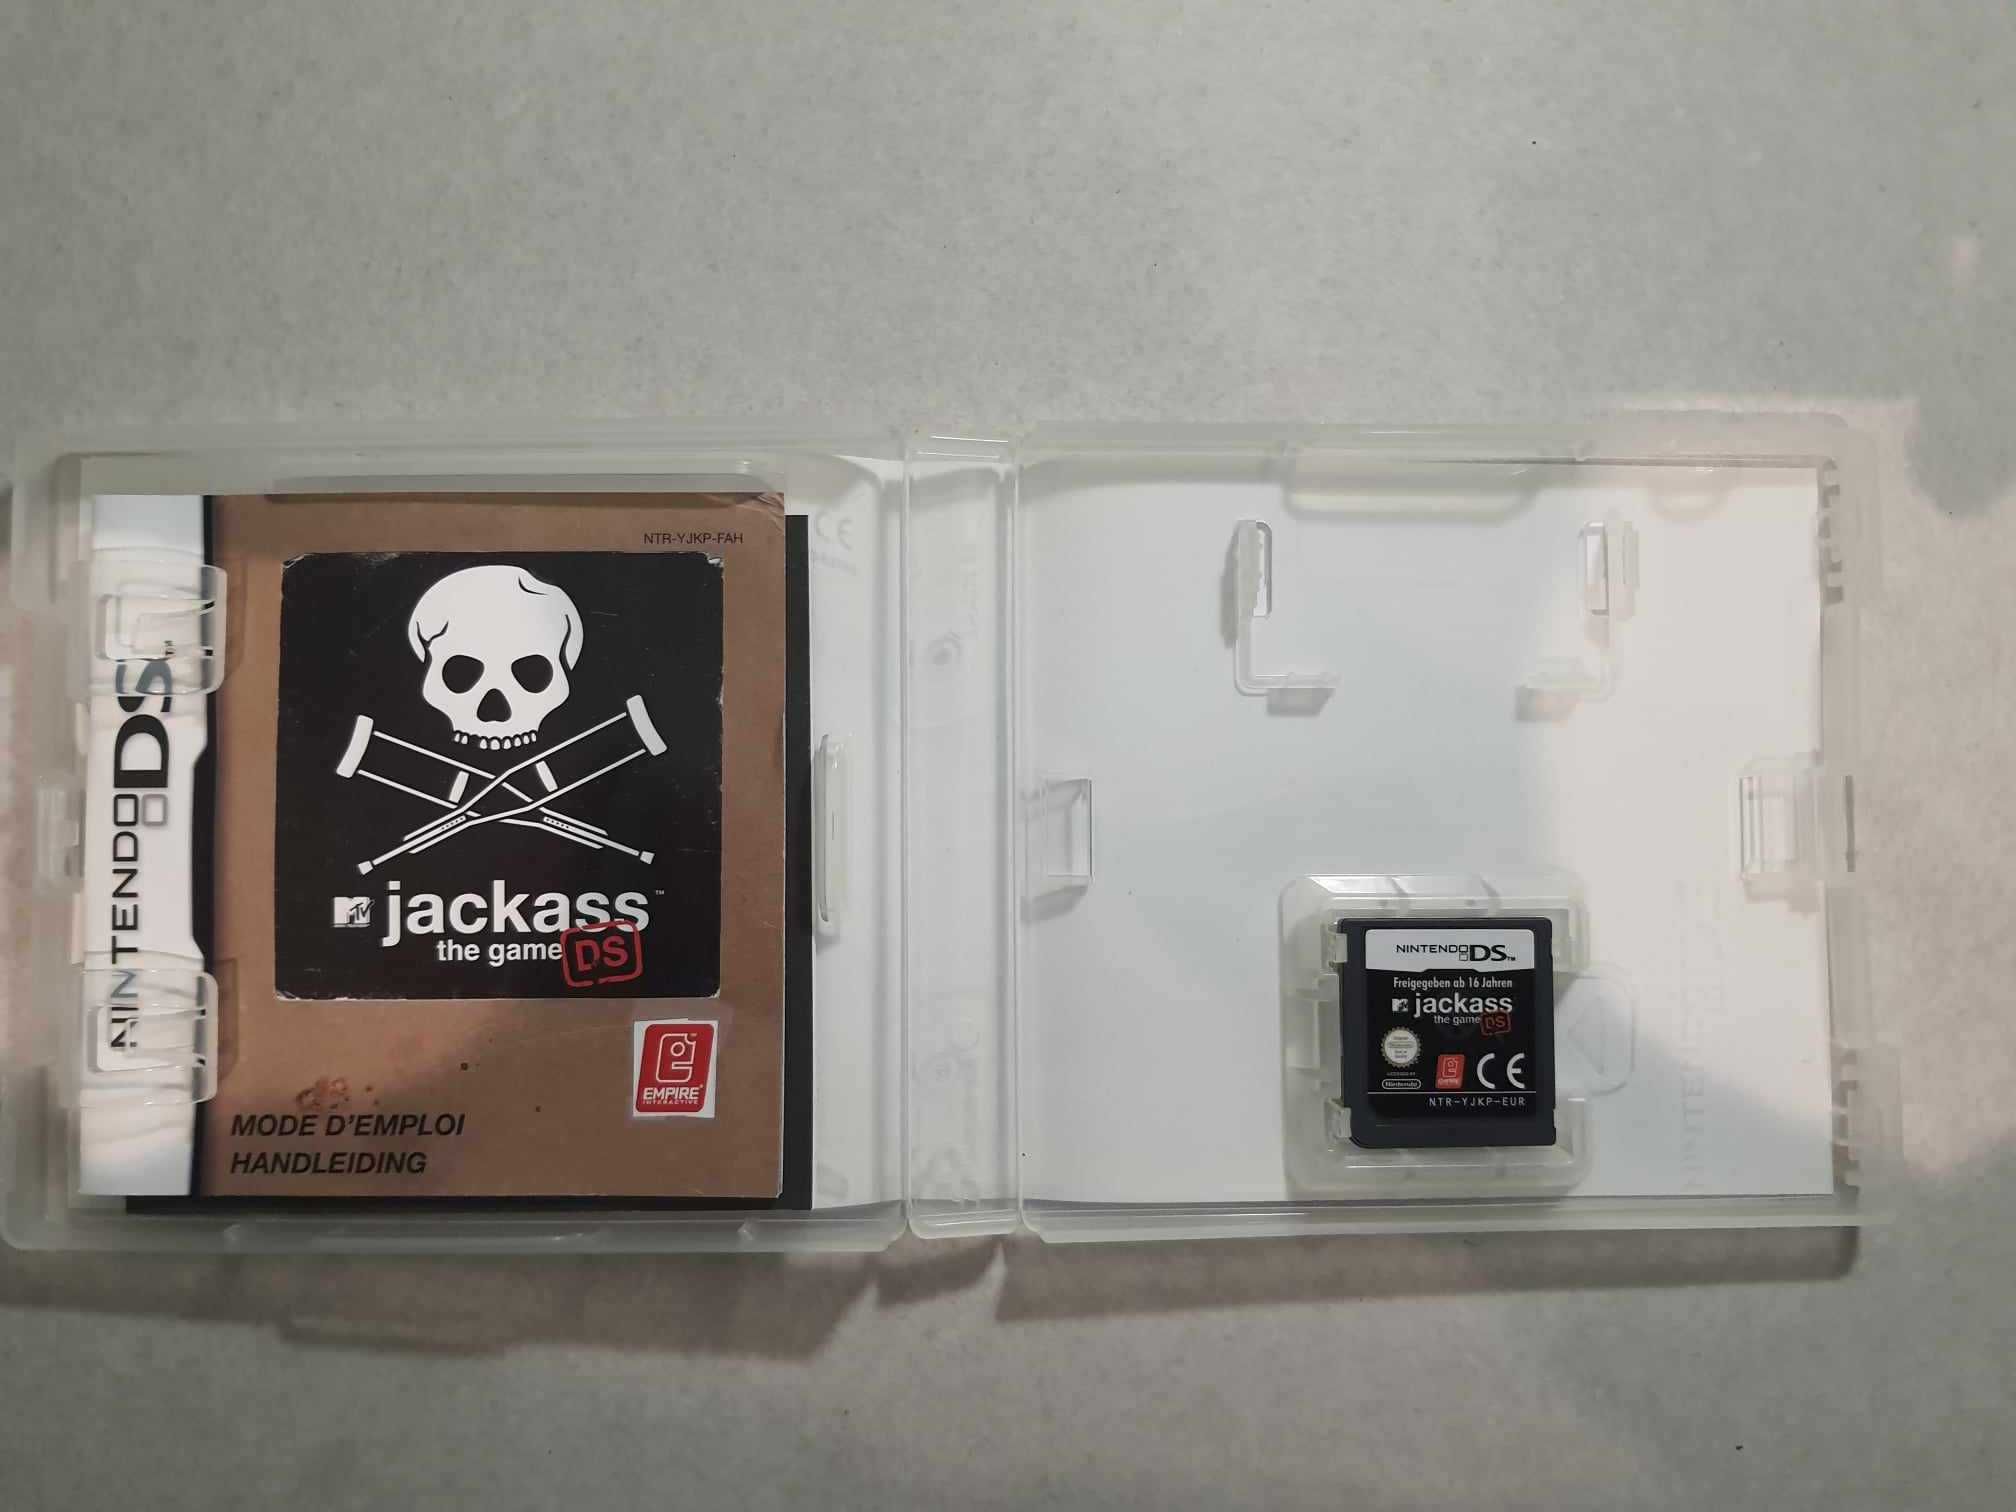 Nintendo DS - Jackass the game